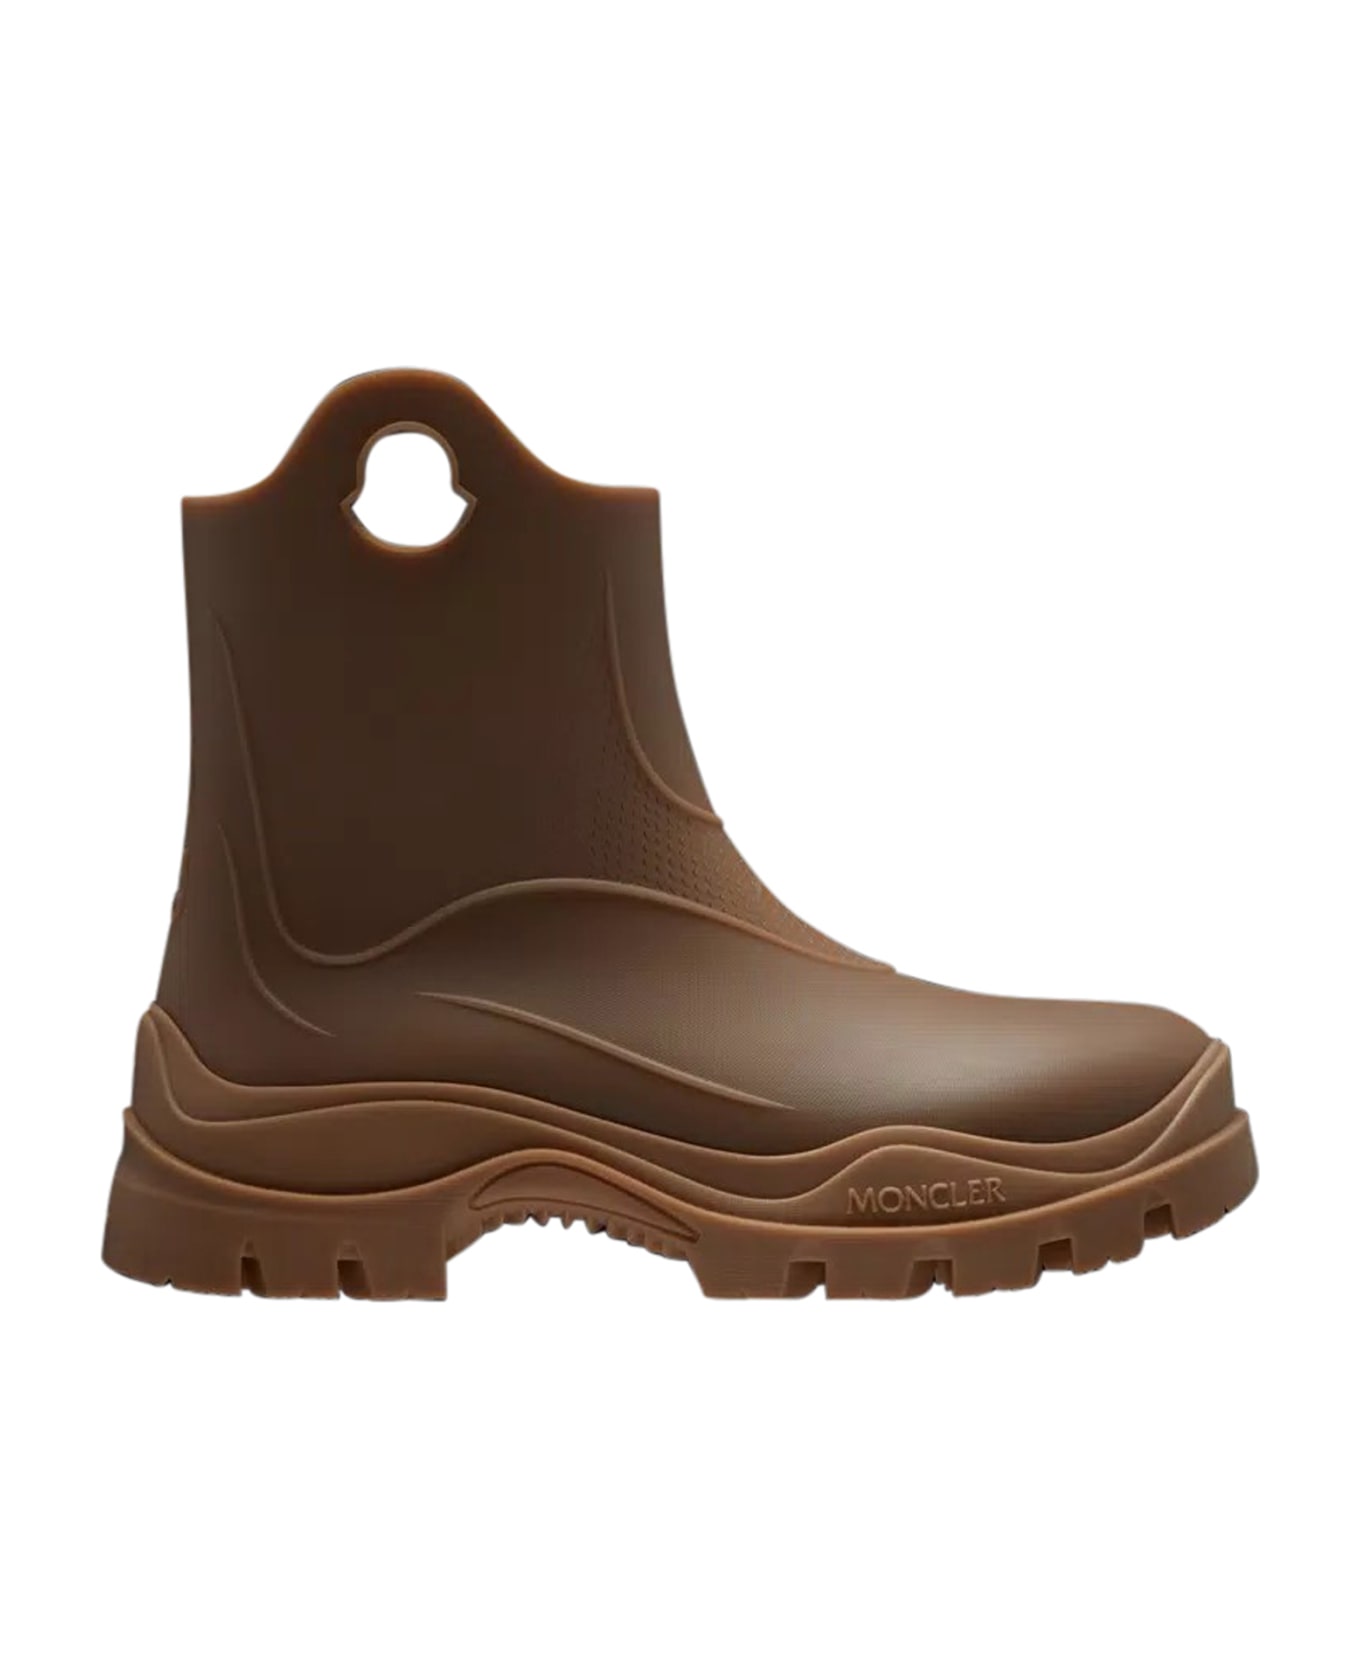 Moncler Misty Rubber Boots - brown